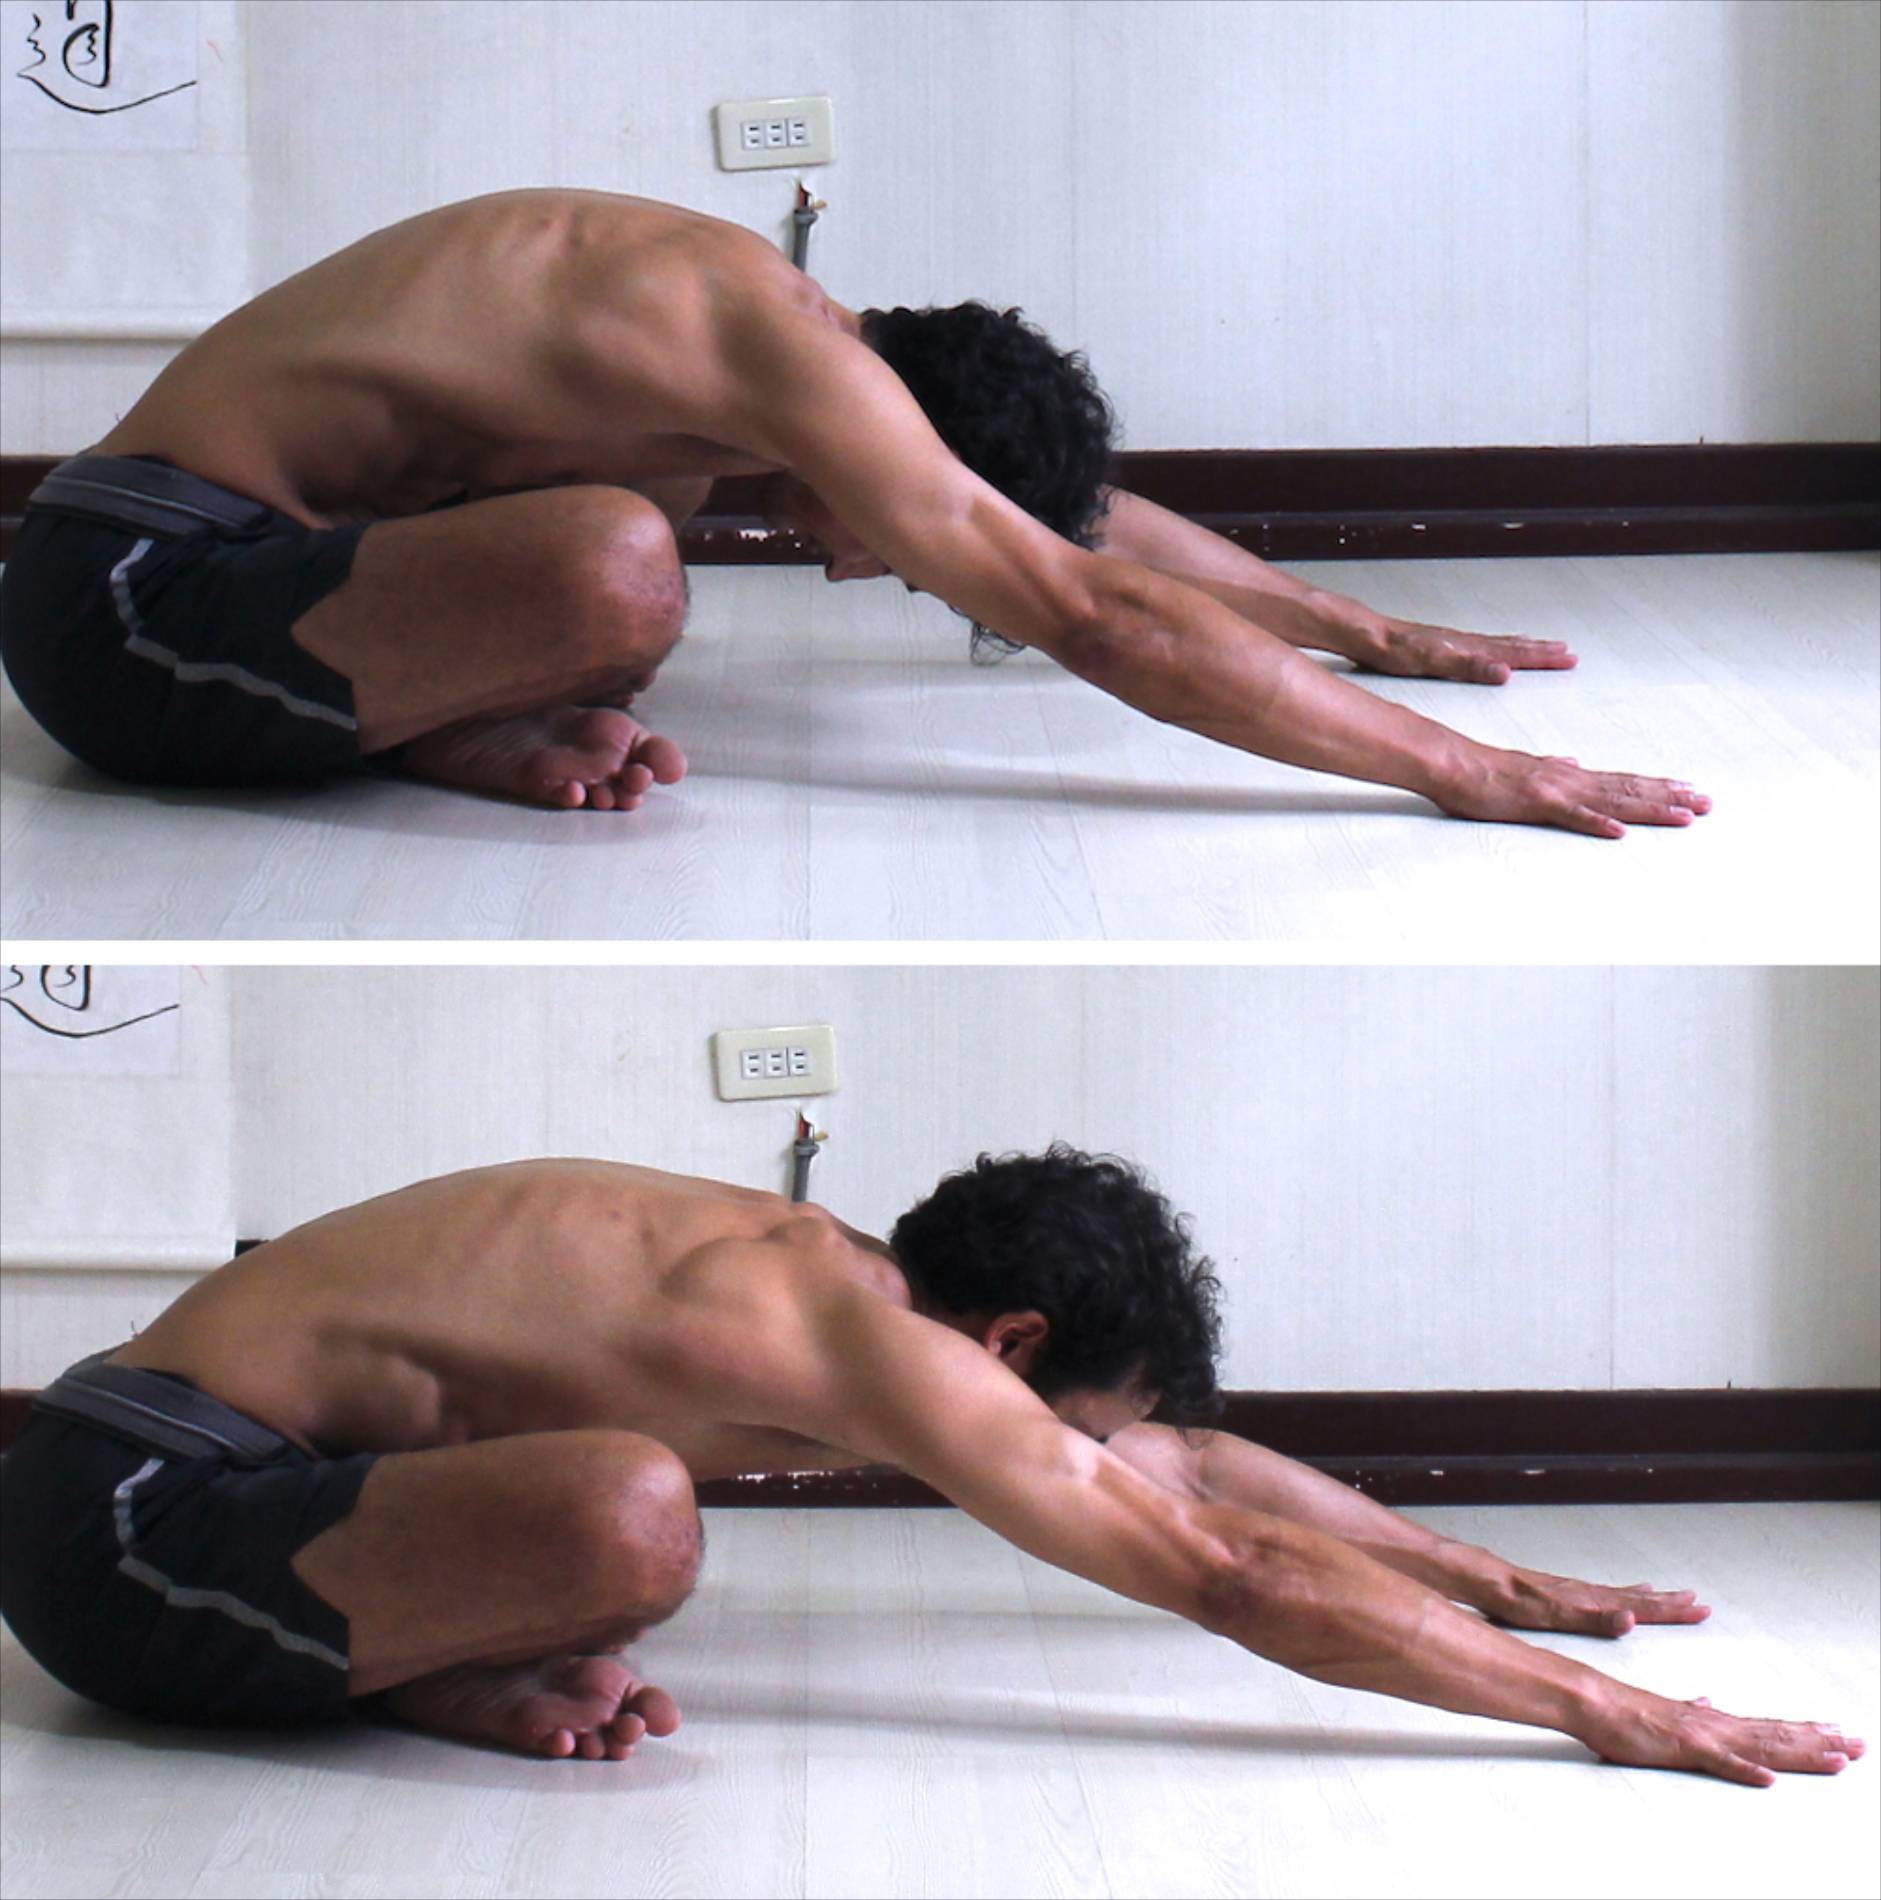 Cross Legged Forward Bend:  
1. Relaxed.  
2. Reaching front ribs forwards, away from pelvis.   
Reaching hands forwards, away from ribcage.